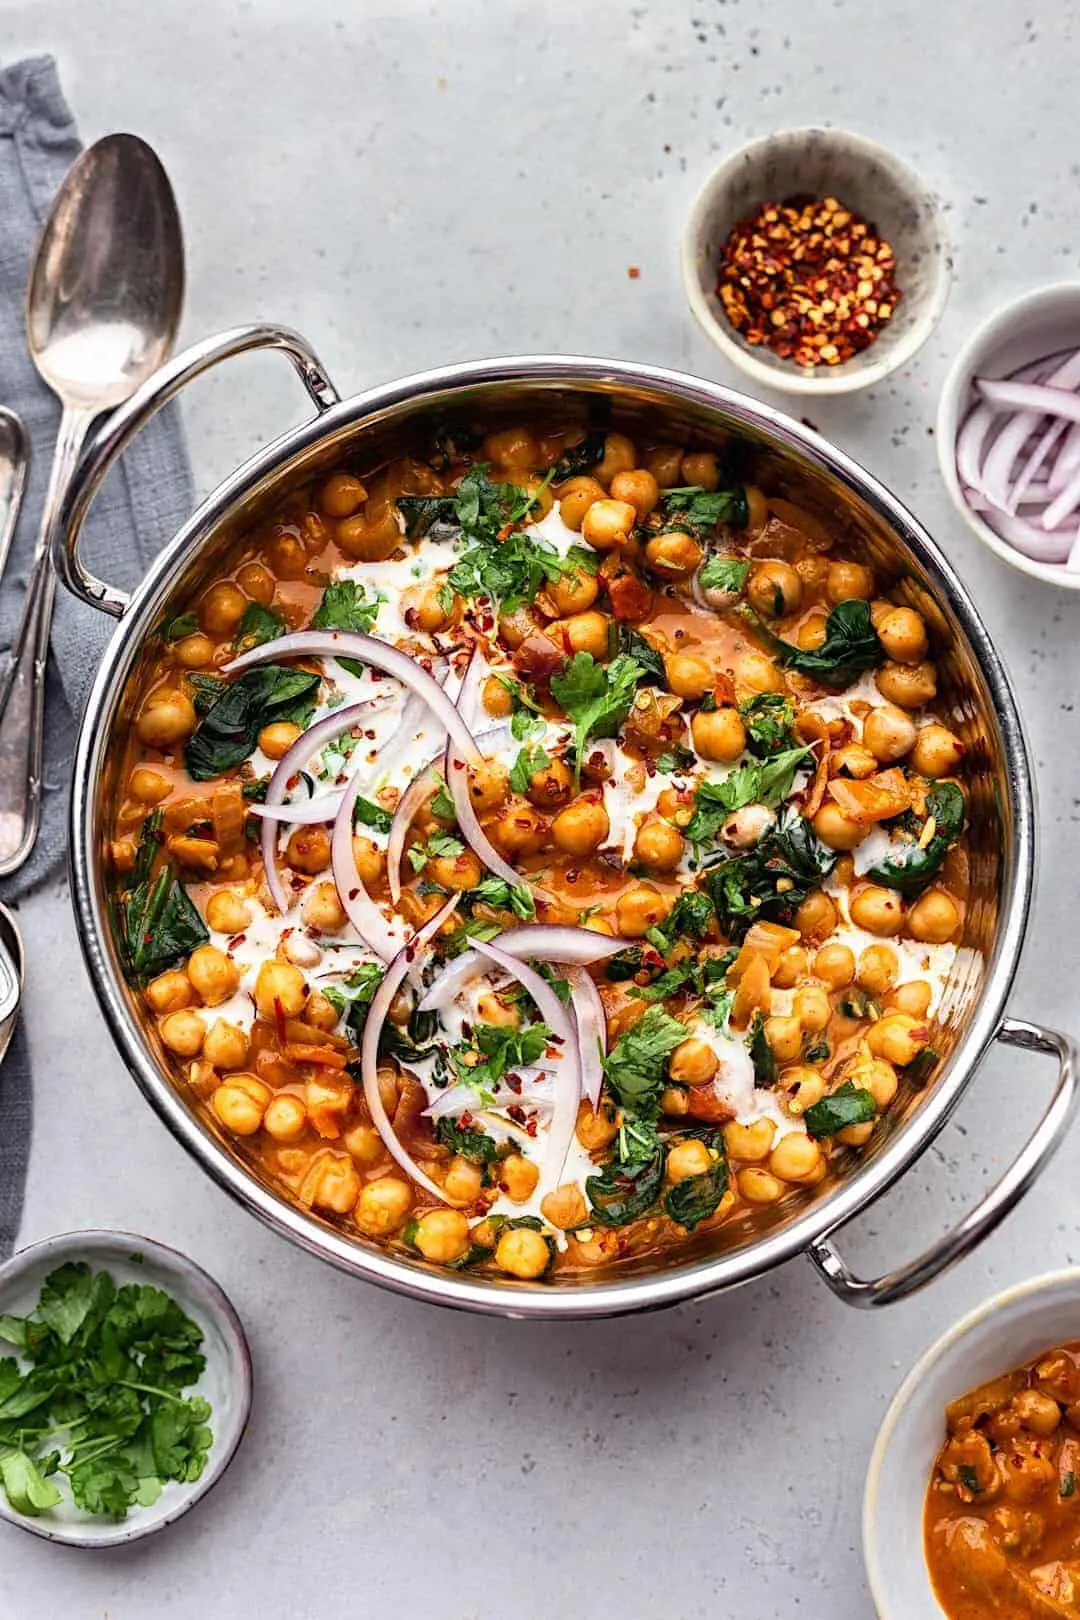 Vegan Chickpea and Spinach Curry #vegan #recipe #curry #chickpea #spinach #healthy